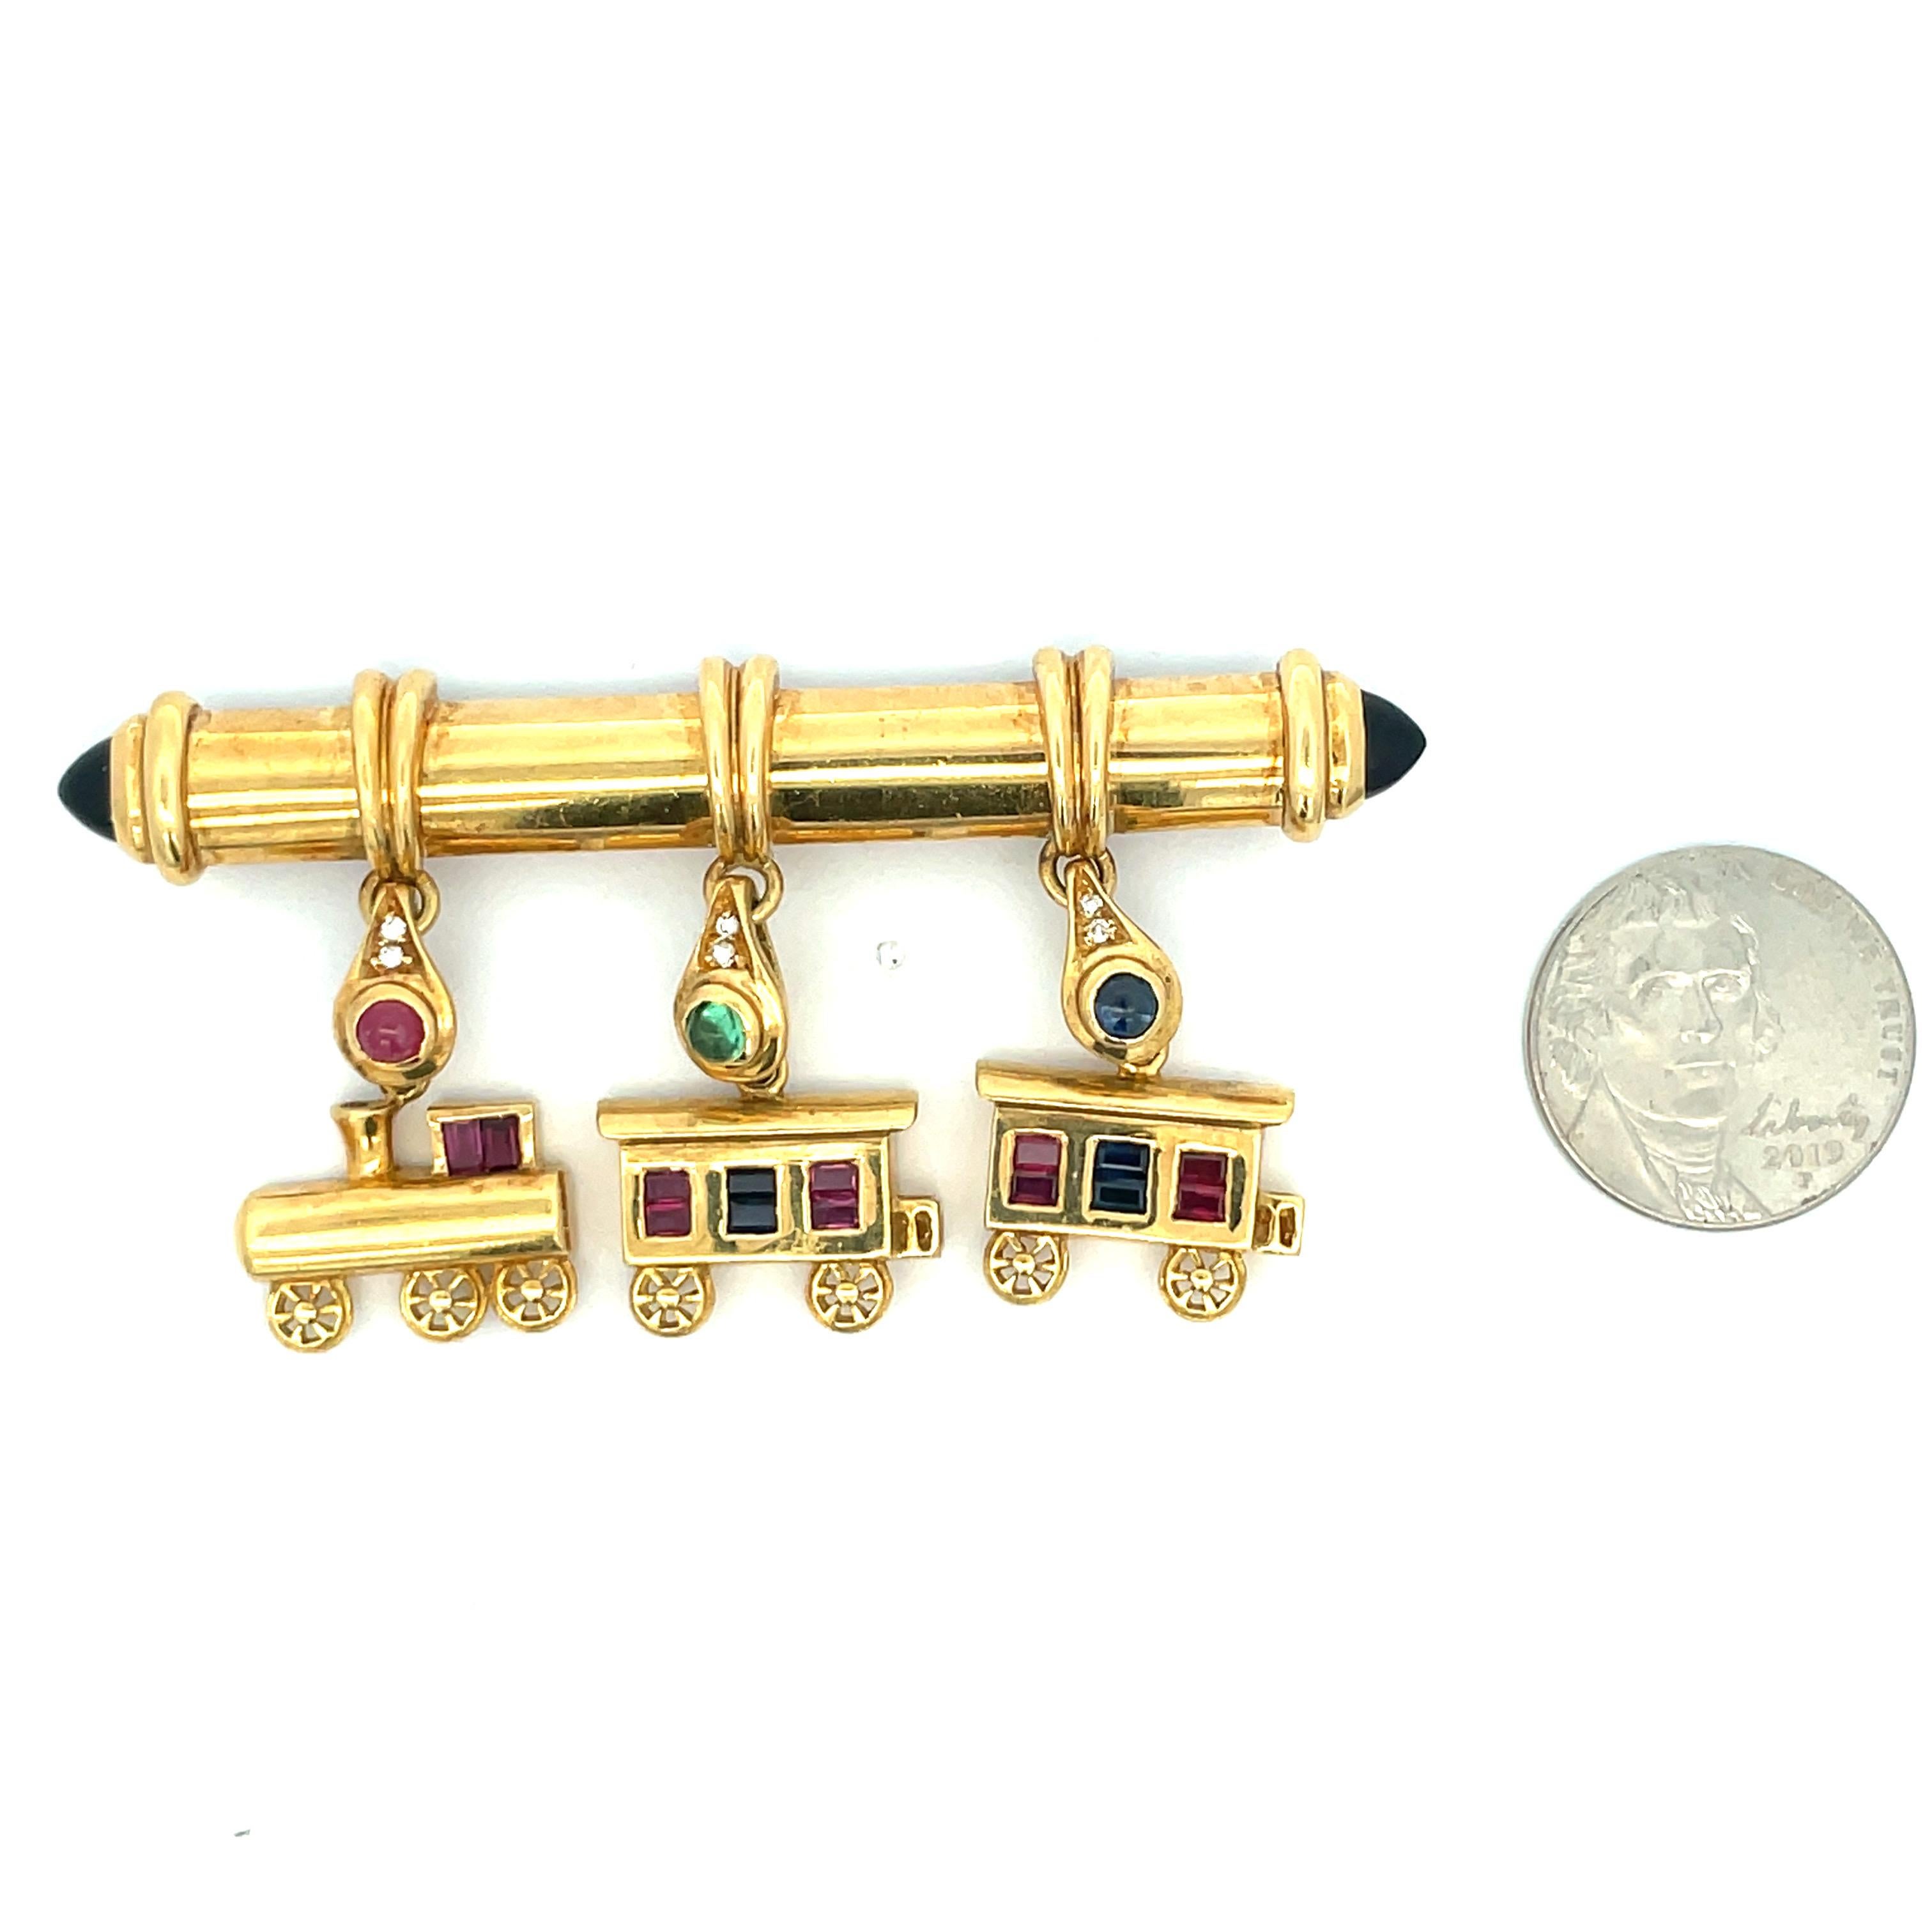 Adorable Retro brooch featuring a series of trains with accents of Sapphires, Emeralds and Rubies crafted in 18 Karat Yellow Gold. 